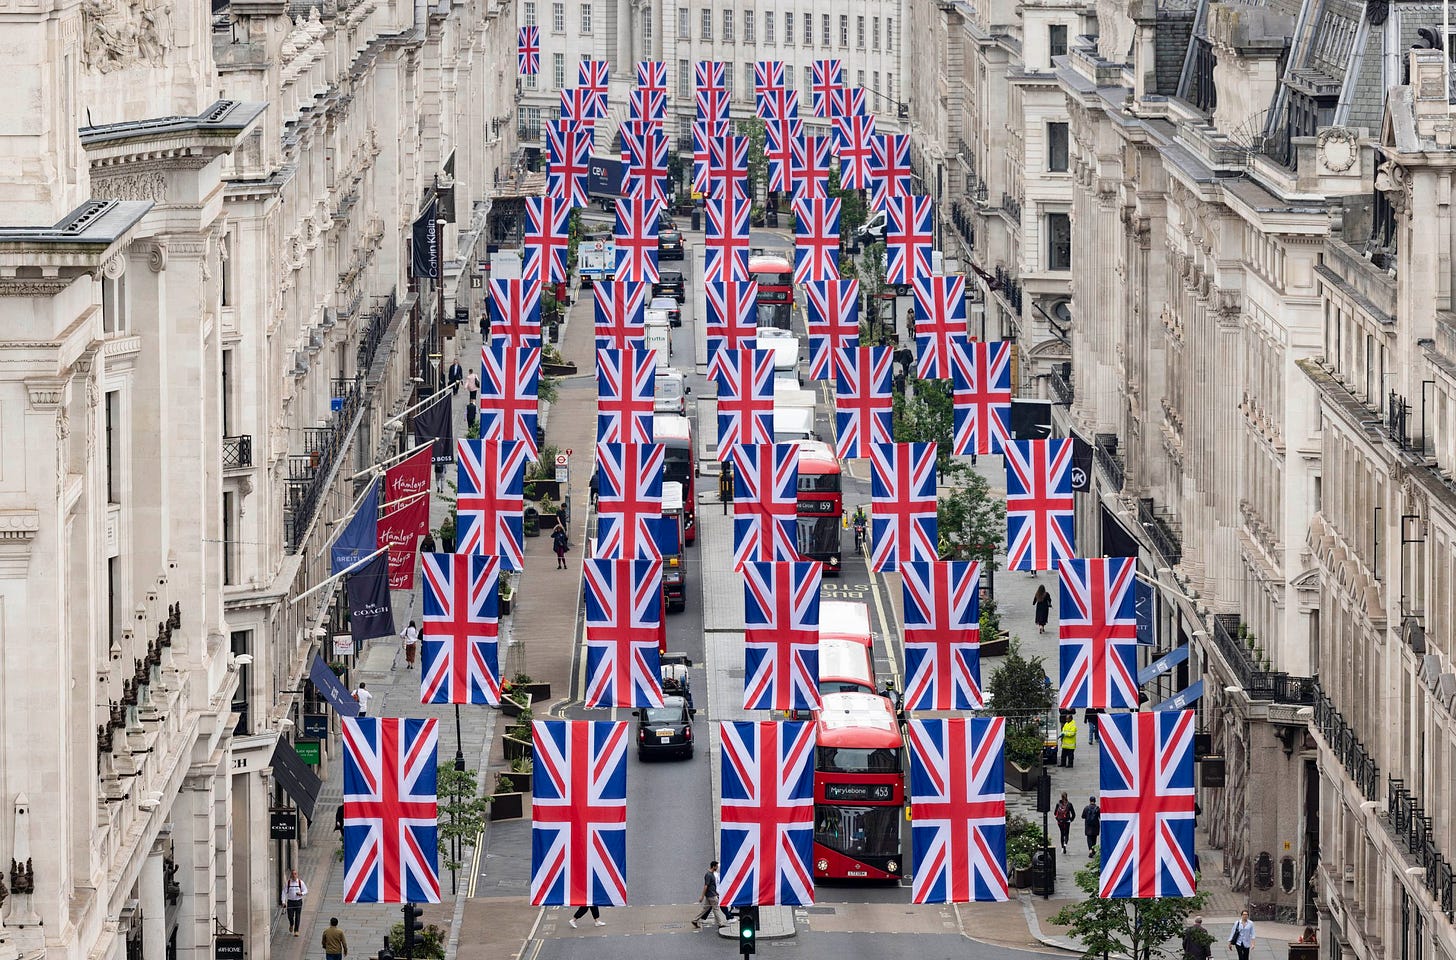 It is not fascistic or fawning to celebrate the Union flags on Regent Street